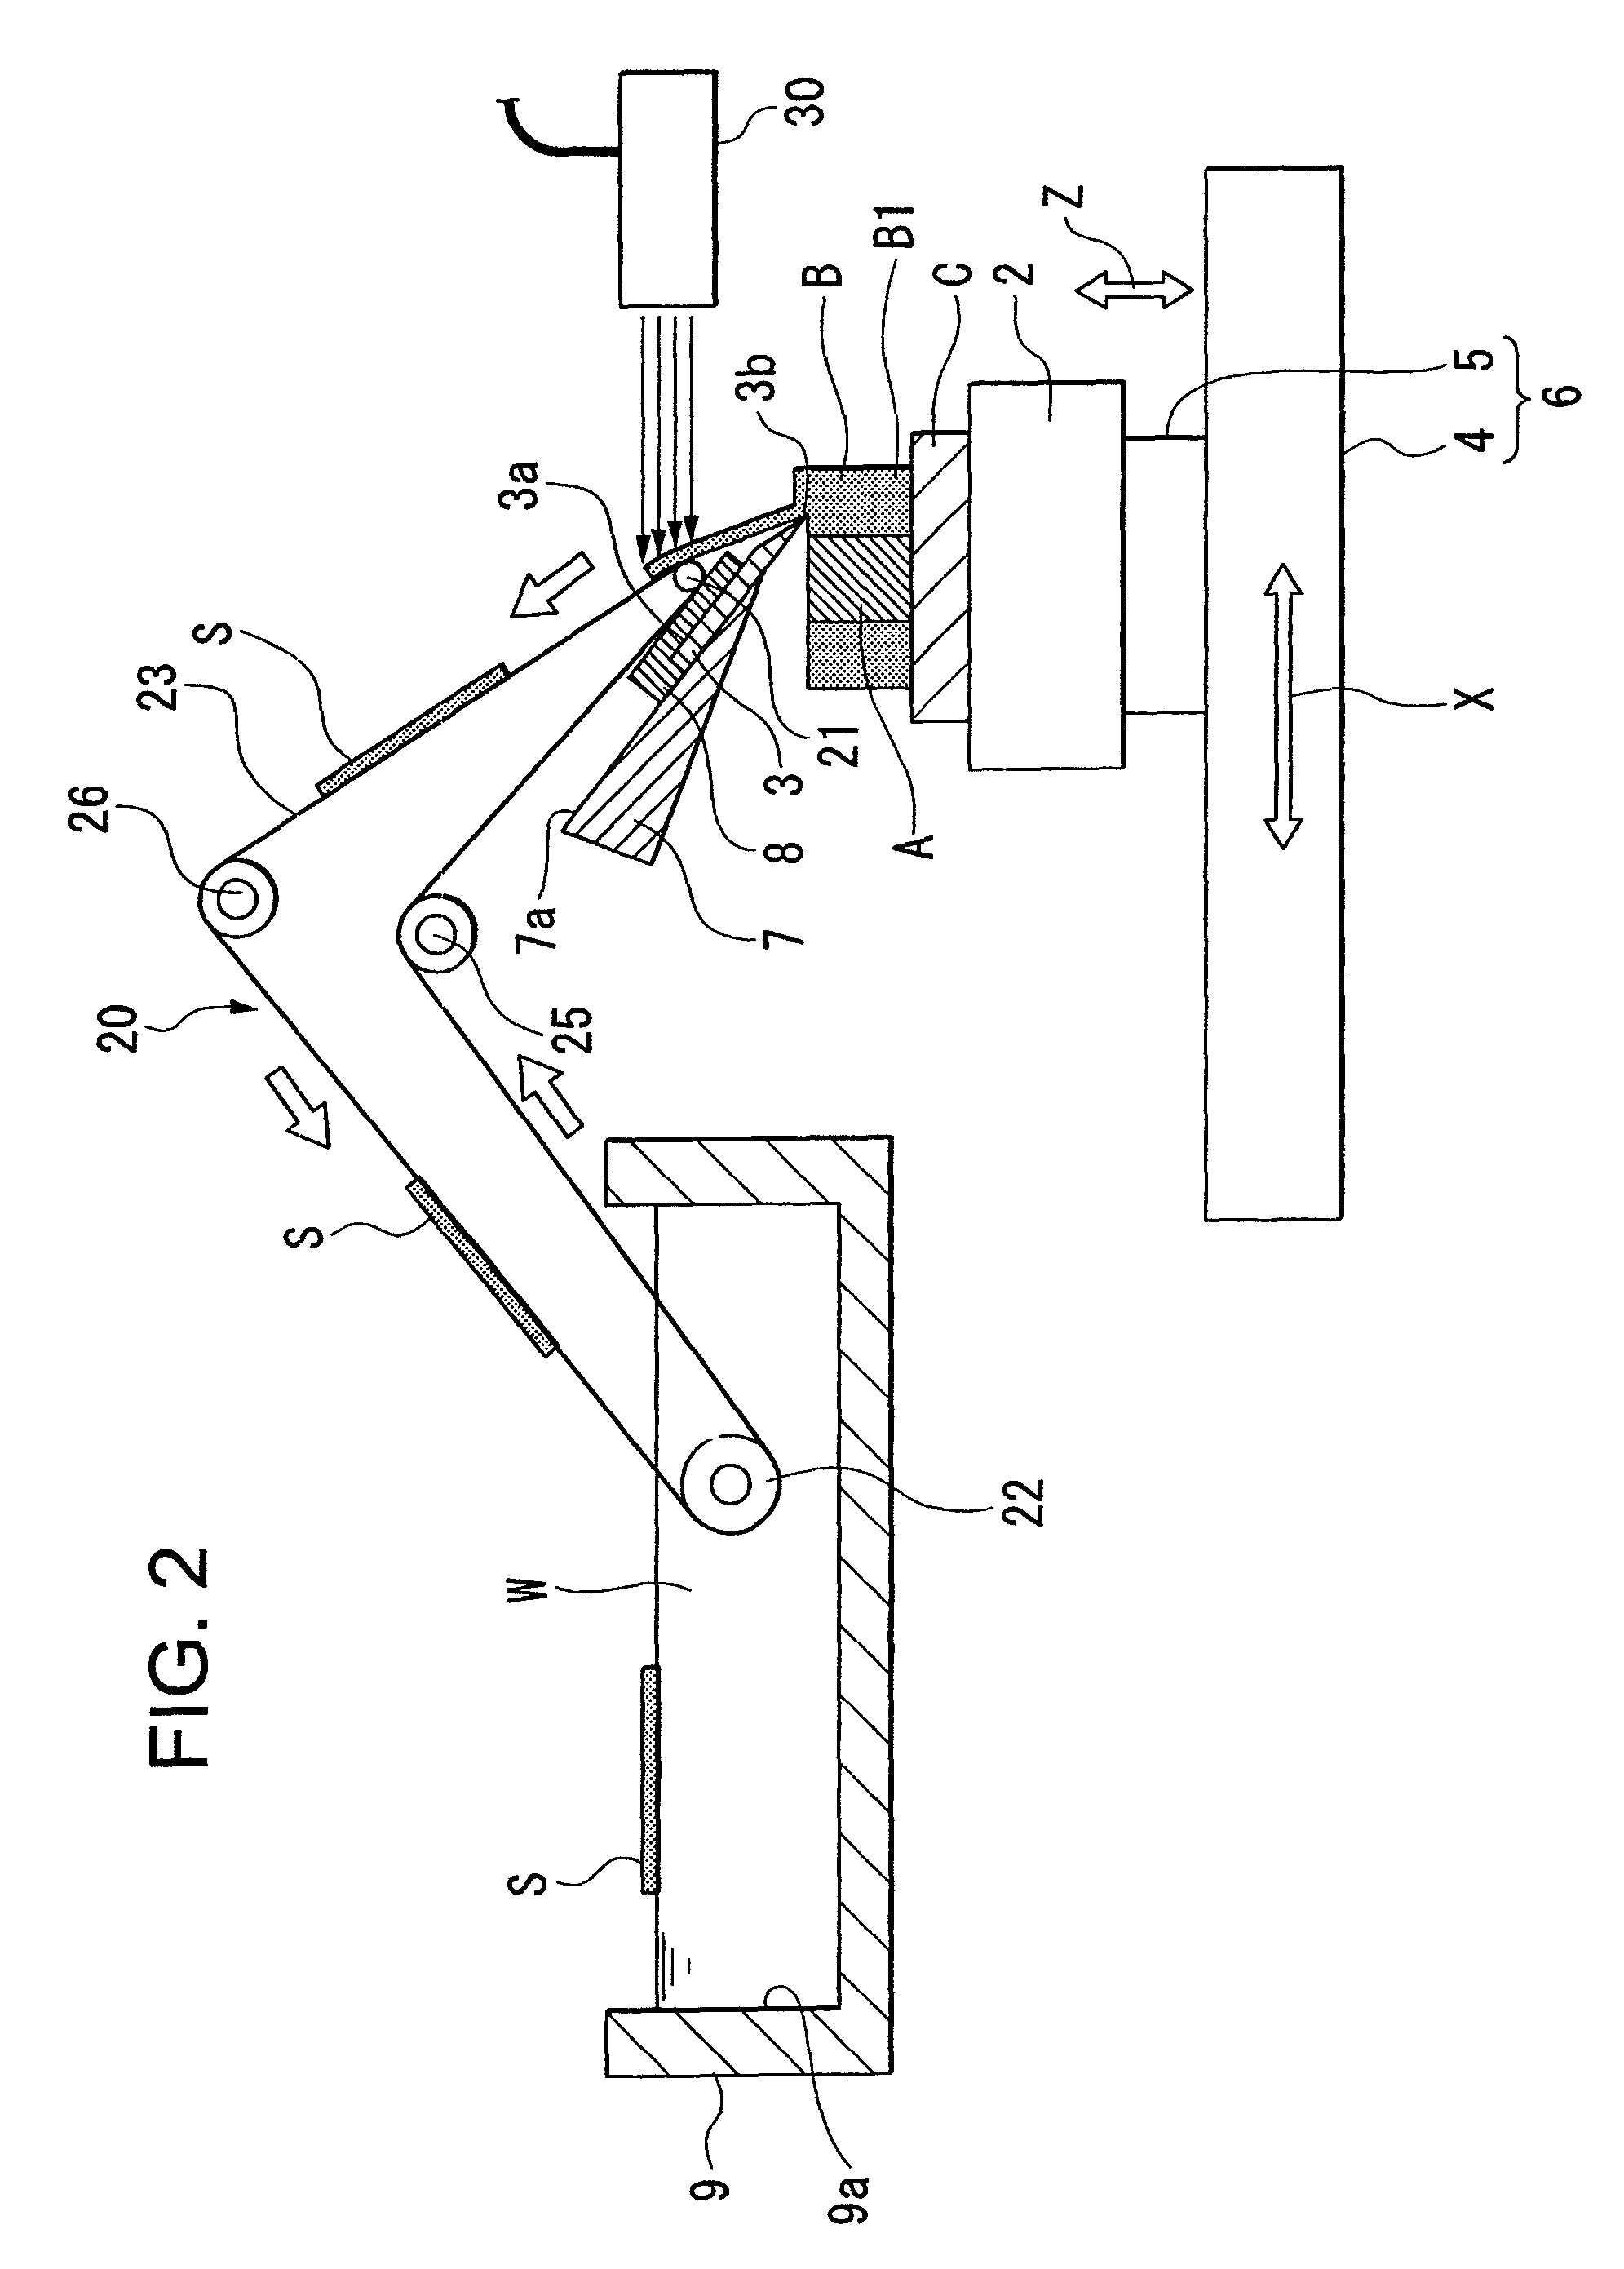 Thin-section conveyor apparatus, thin-section scooping tool, and method for transporting thin sections